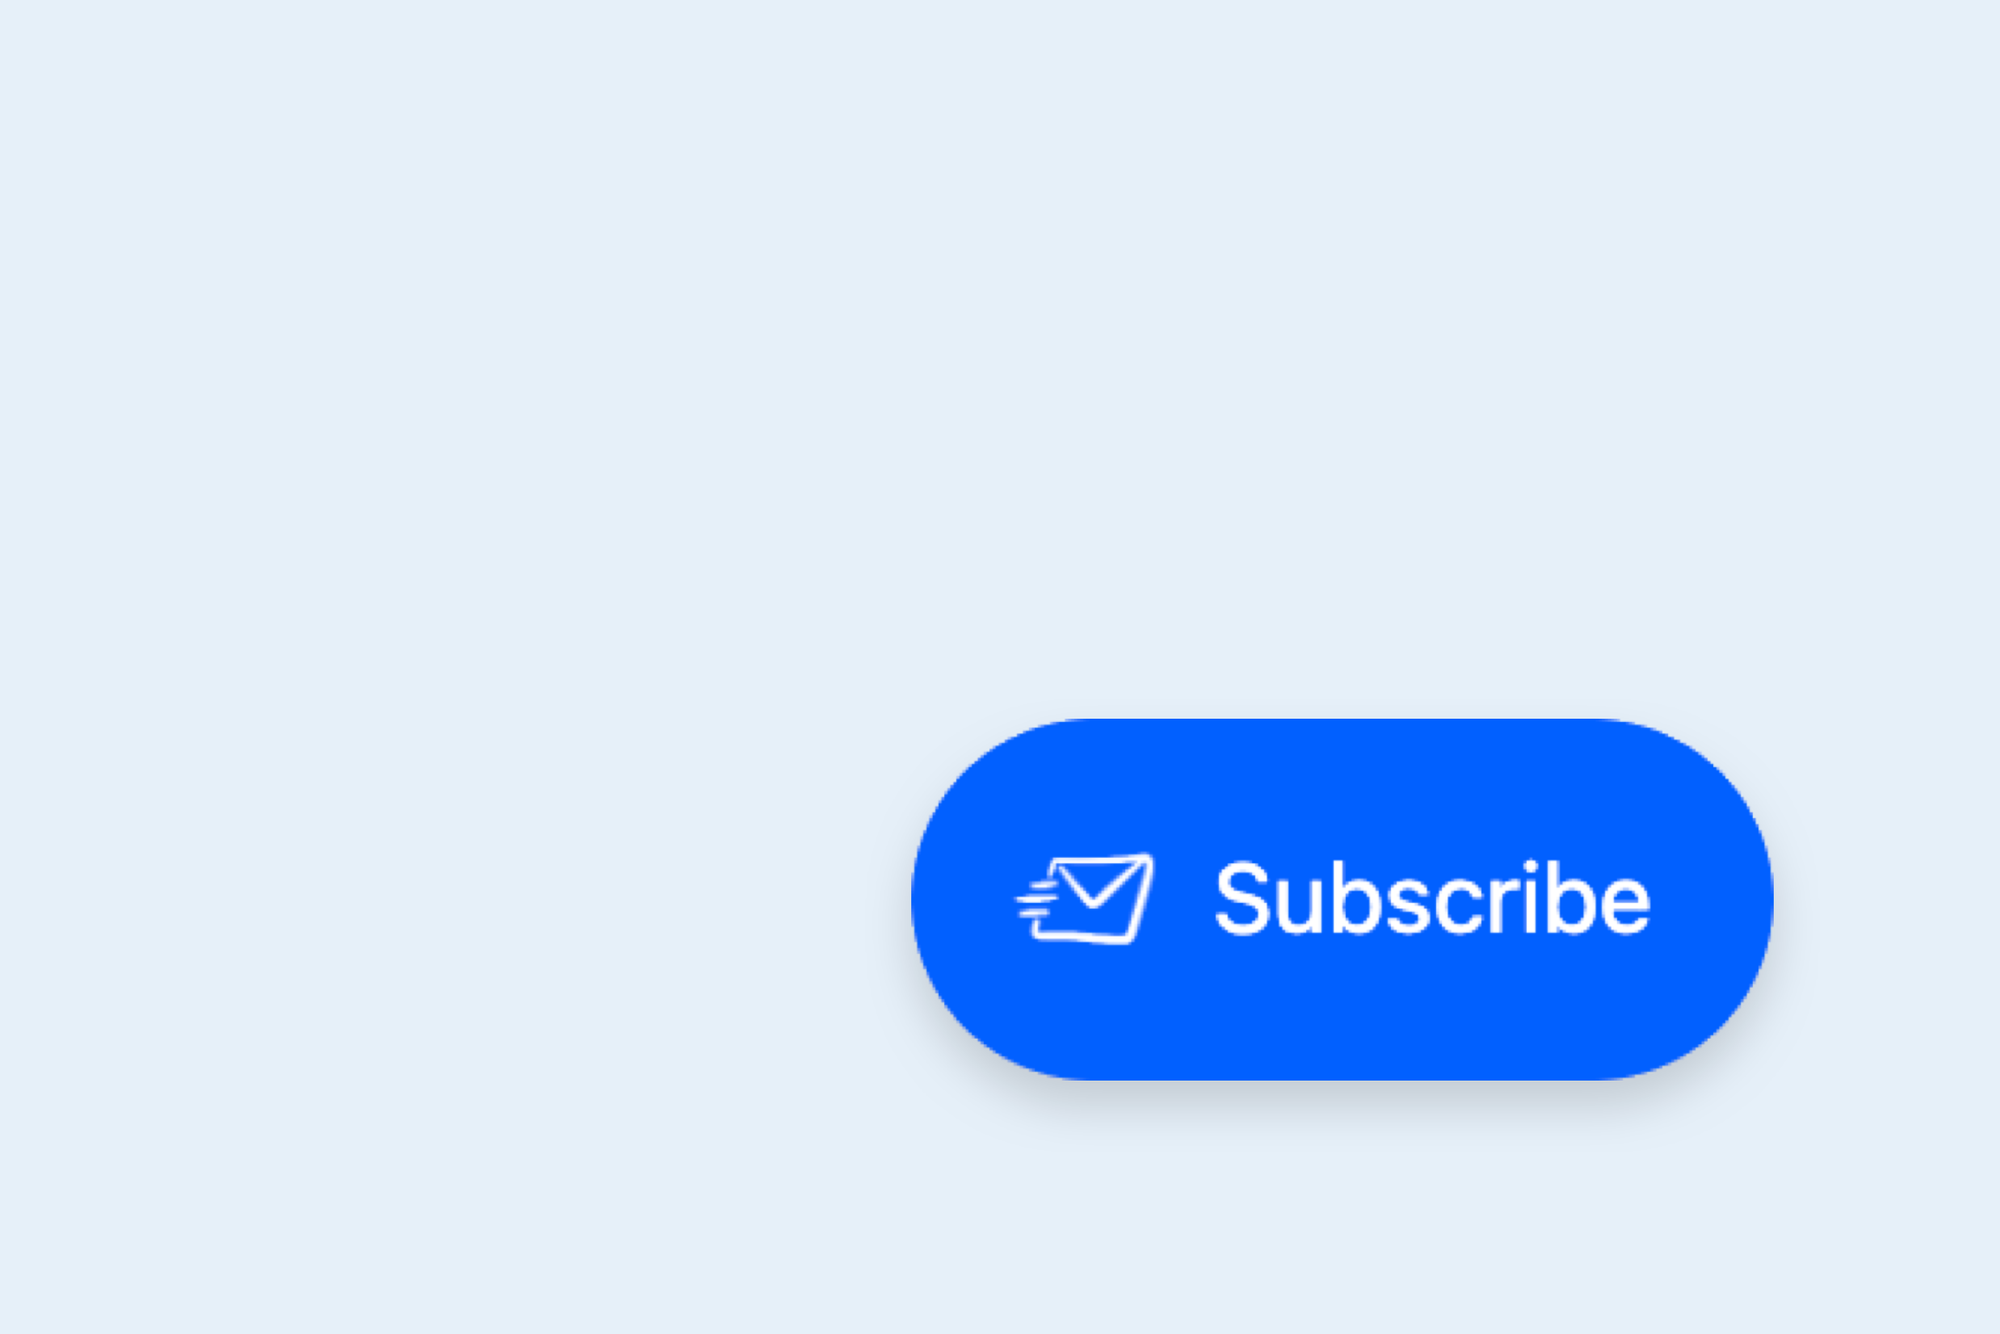 How to remove the “Subscribe” button from your Ghost site